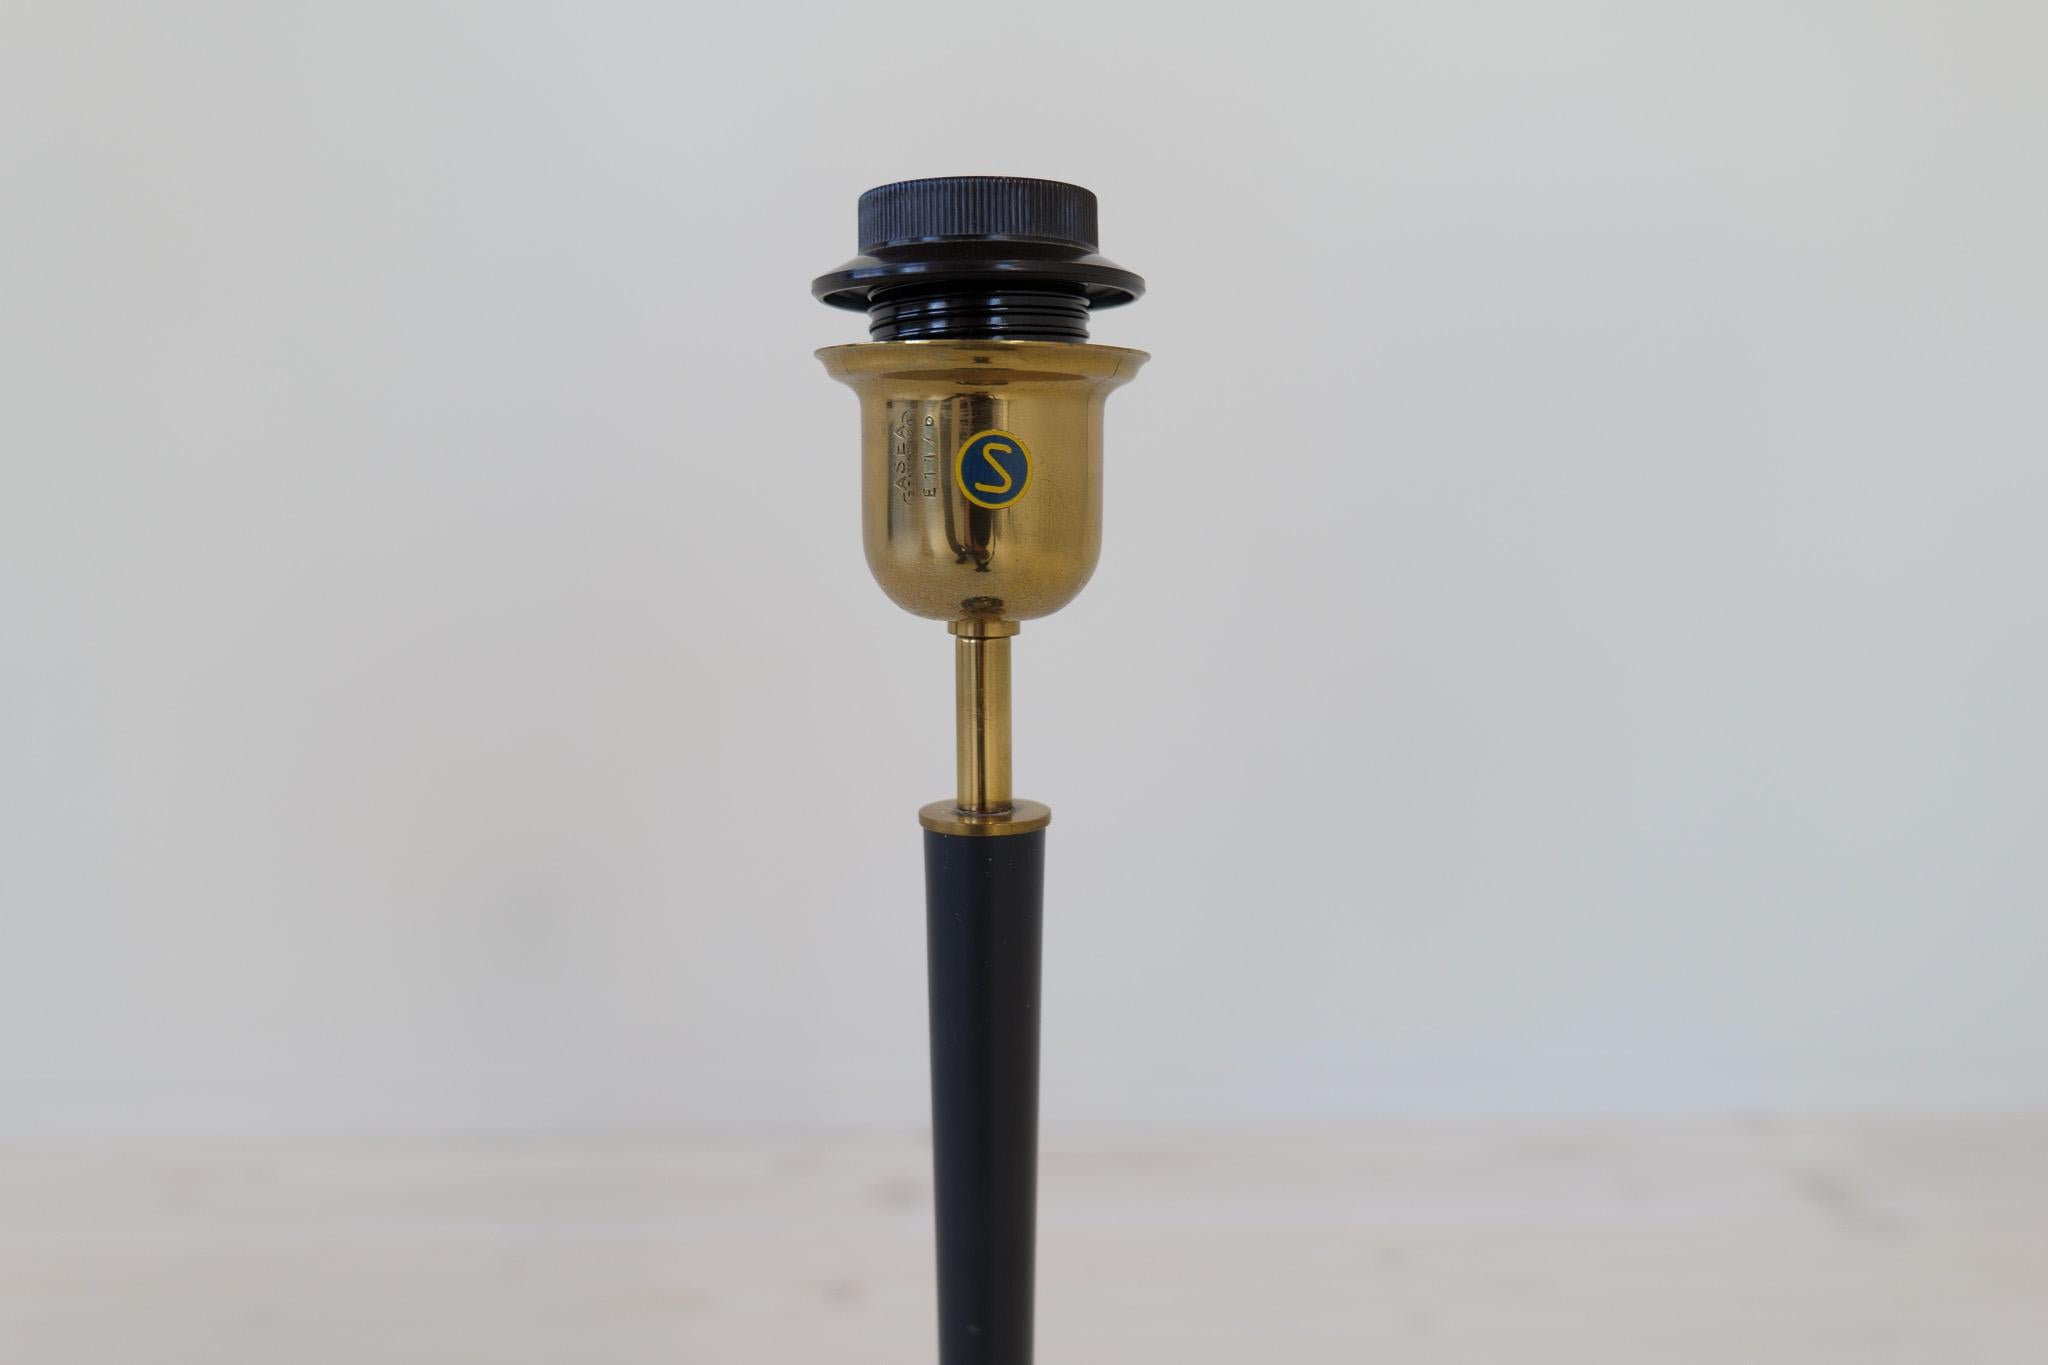 Midcentury Modern Table Lamp in Brass and Cast Iron Asea Sweden, 1950s For Sale 6